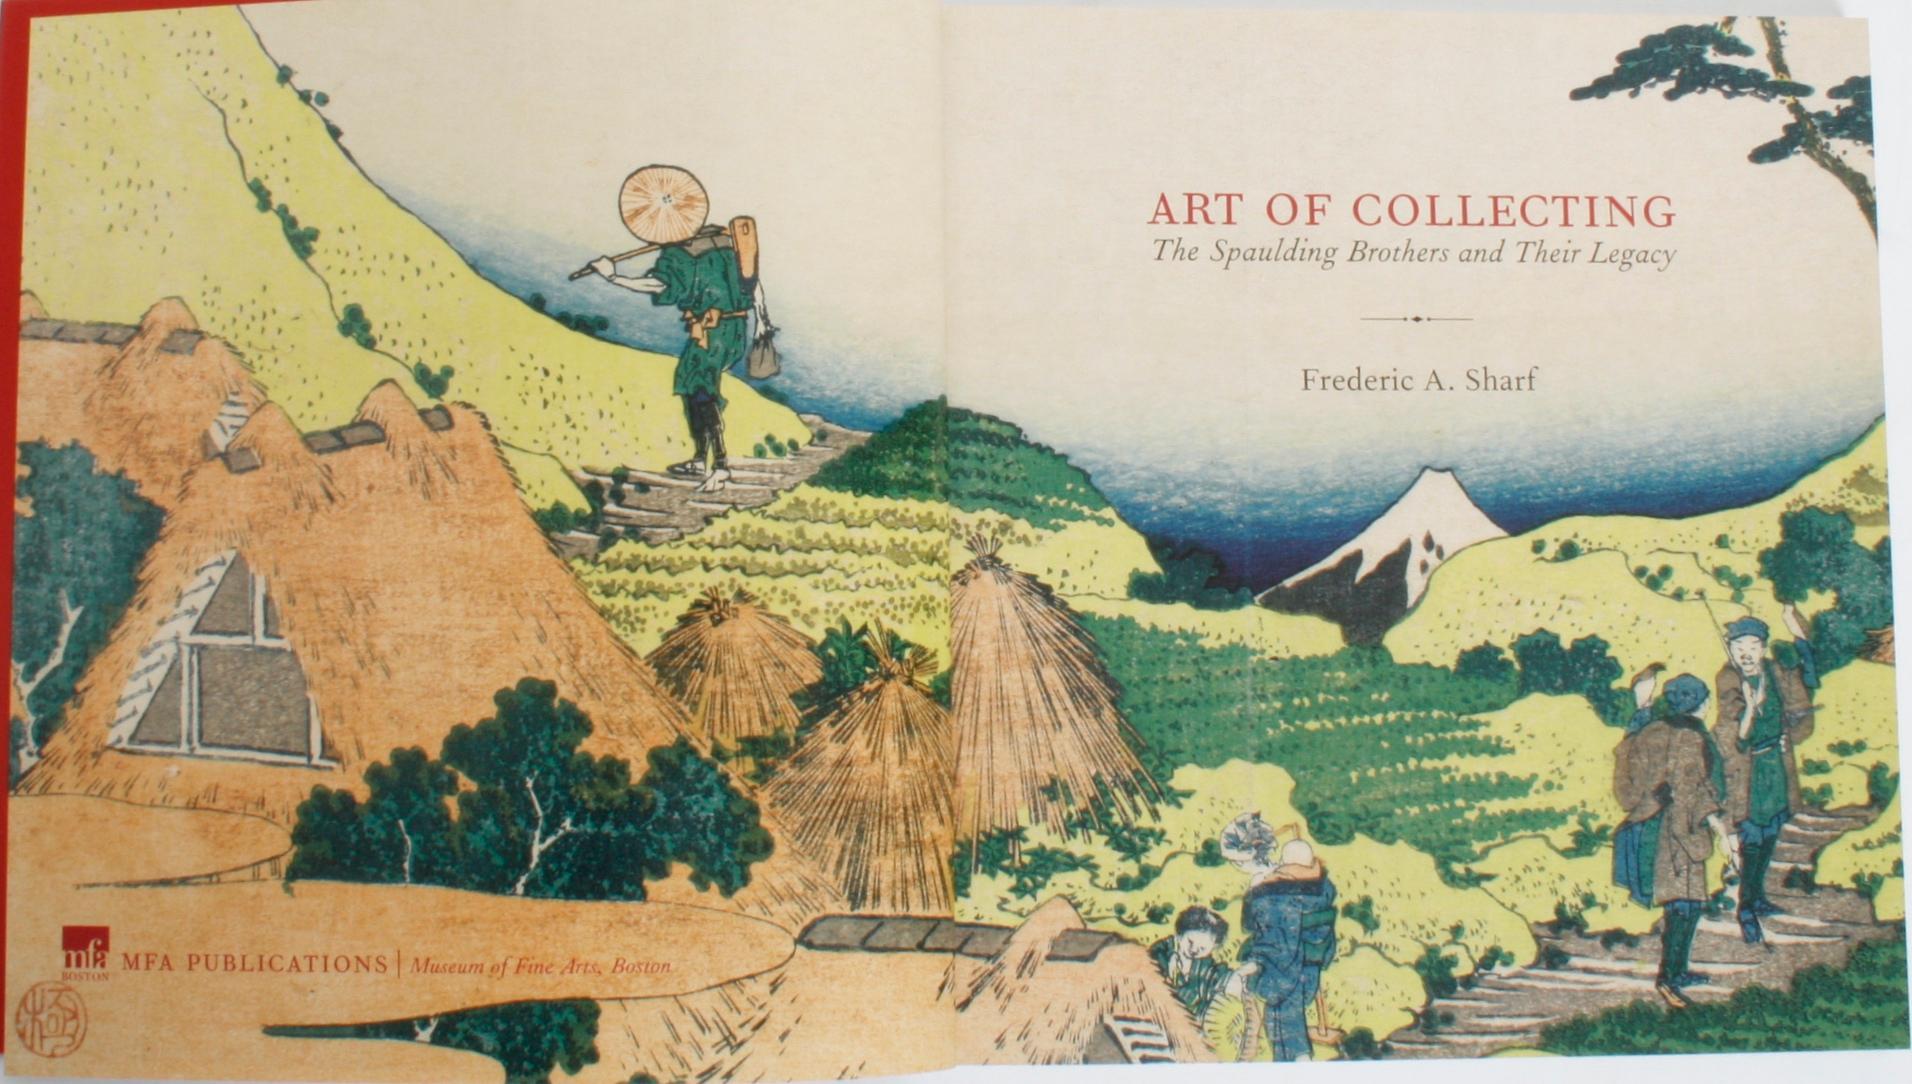 Art of Collecting, The Spaulding Brothers and Their Legacy by Frederic A. Sharf. Boston: MFA Publication/Museum of Fine Arts Boston, 2007. First Edition softcover. 144 pp. The history of the Spaulding brothers as members of the Boston society,